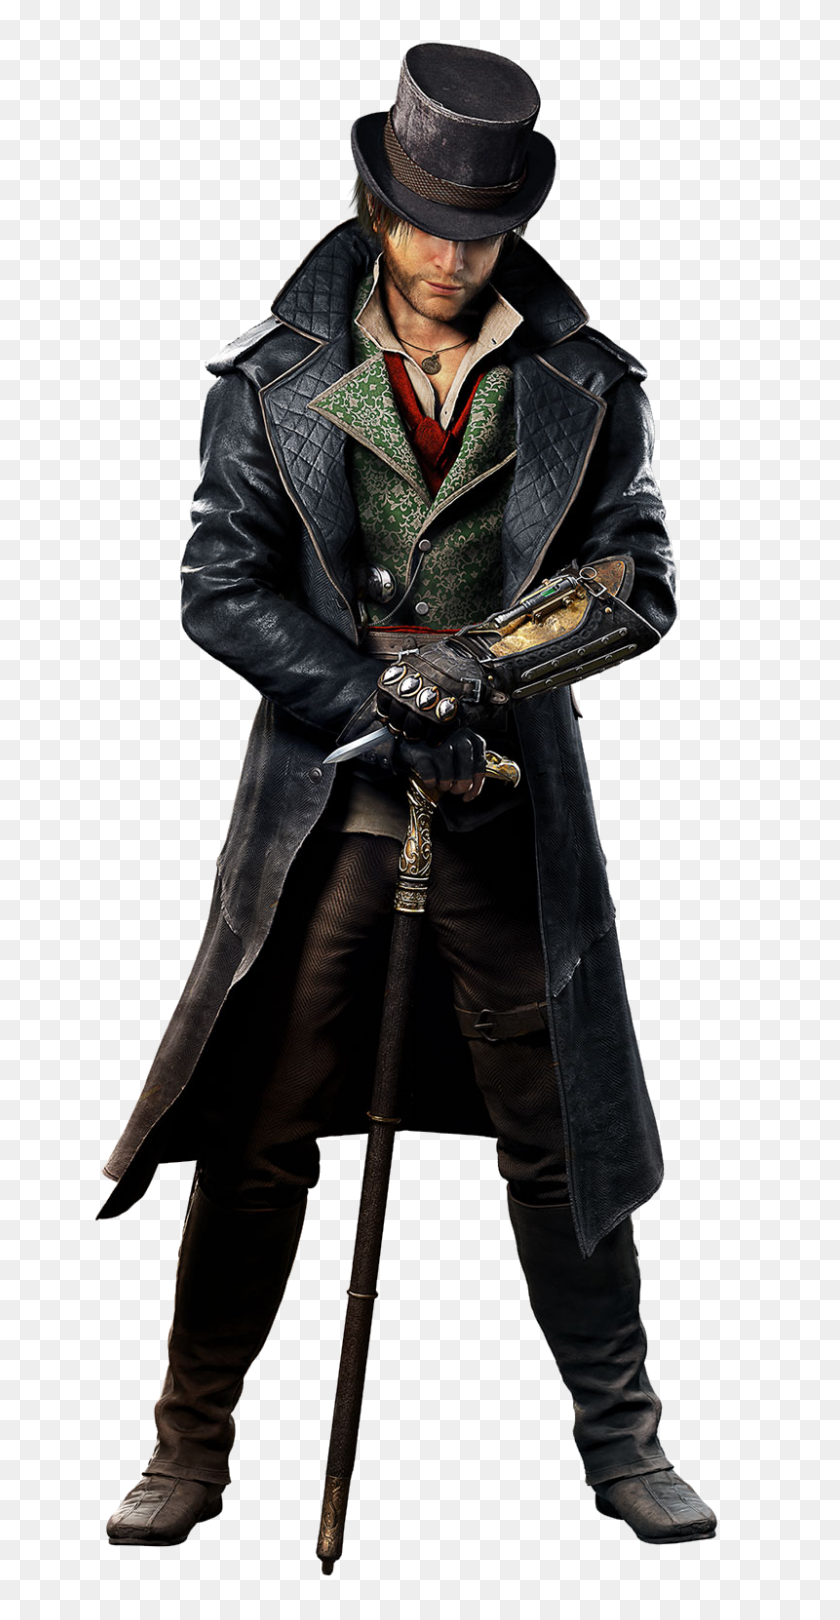 800x1600 Assassin Creed Syndicate Png Transparent Assassin Creed Syndicate - Assassins Creed PNG